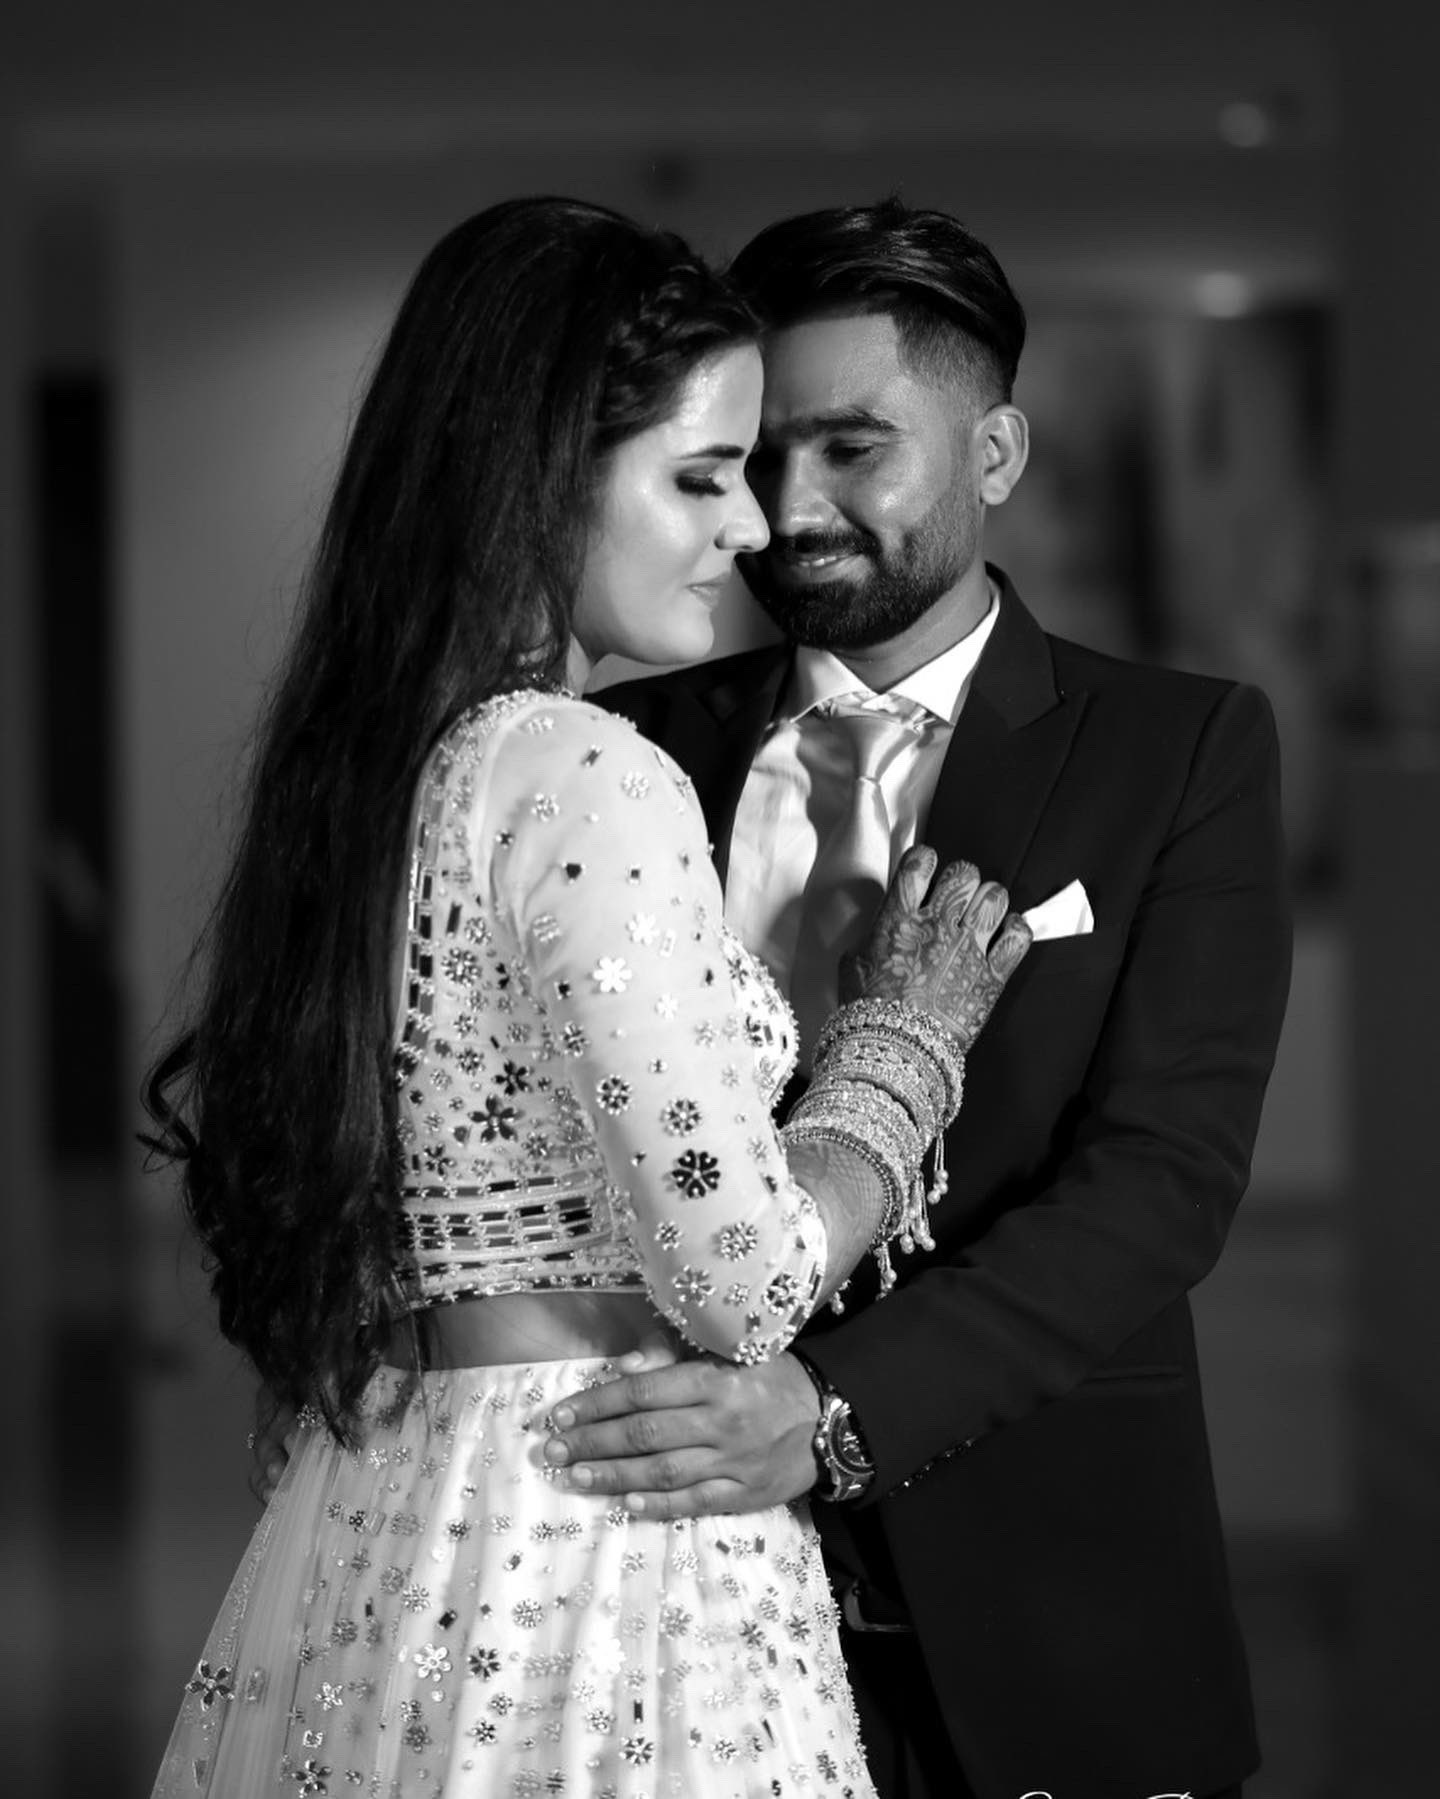 rahul tewatia gets engaged and shares pic with his fiancee